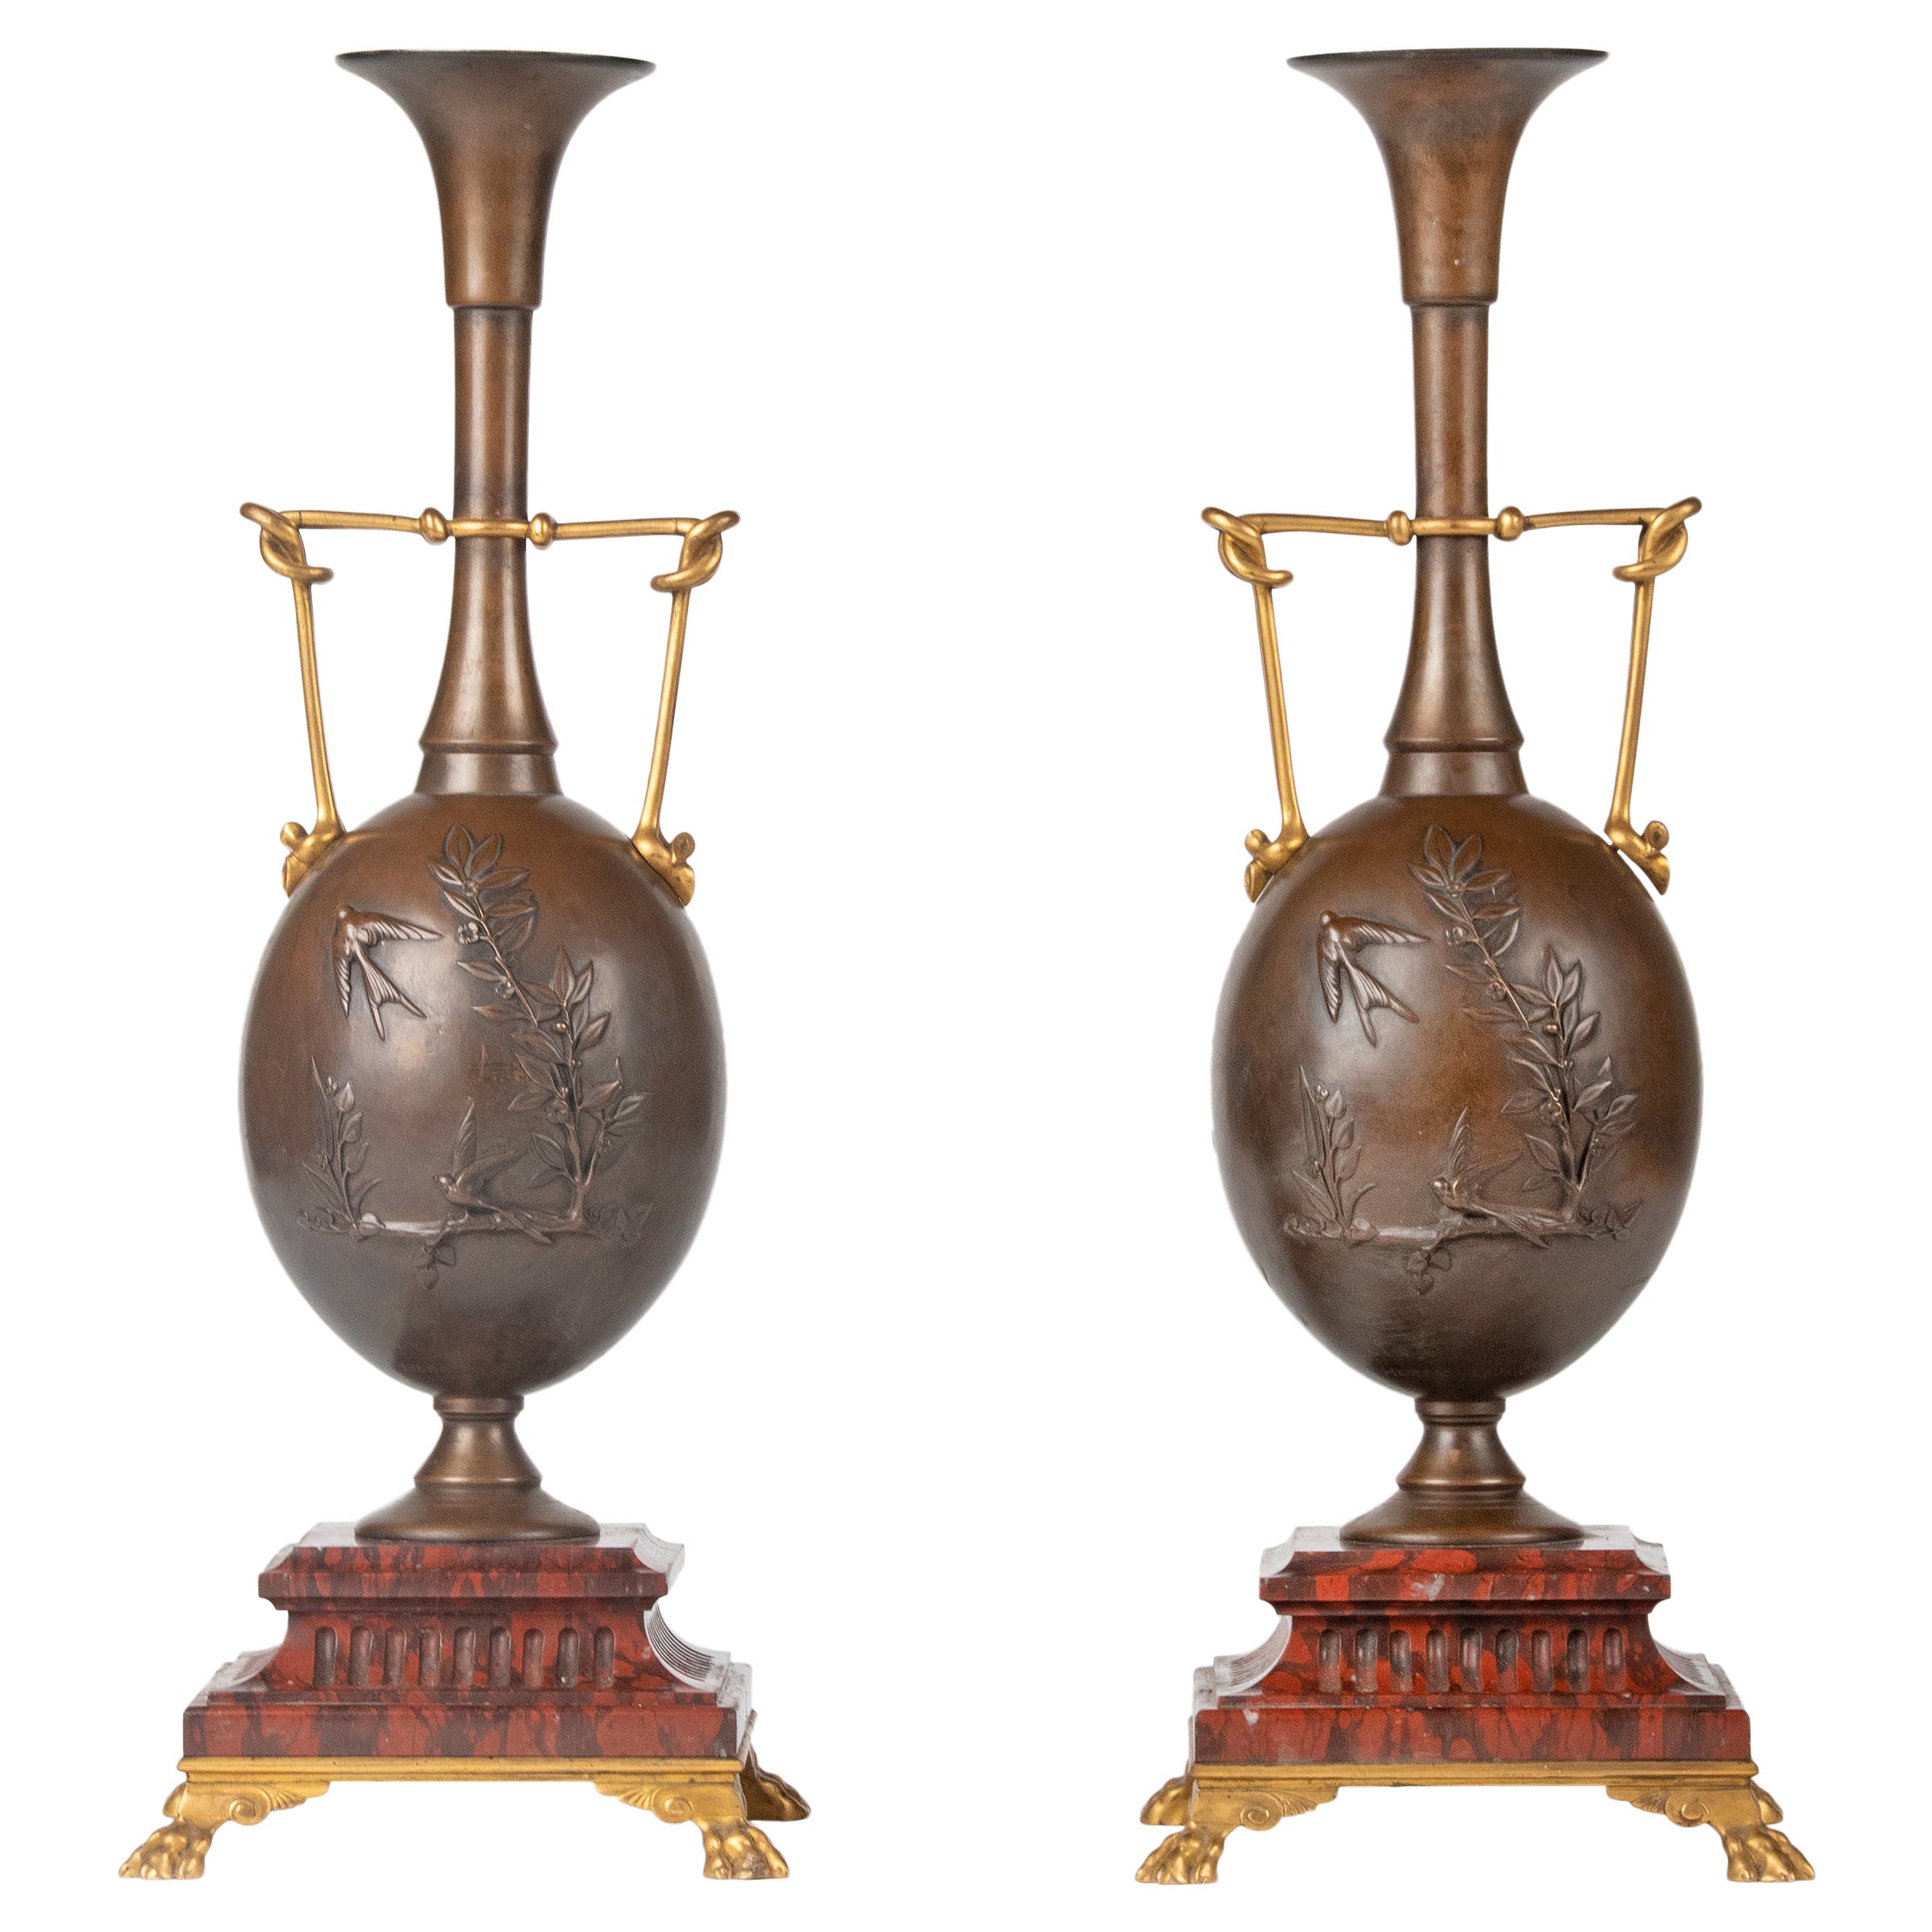 Mid 19th Century Napoleon III Bronze Vases by Cahieux & Barbedienne